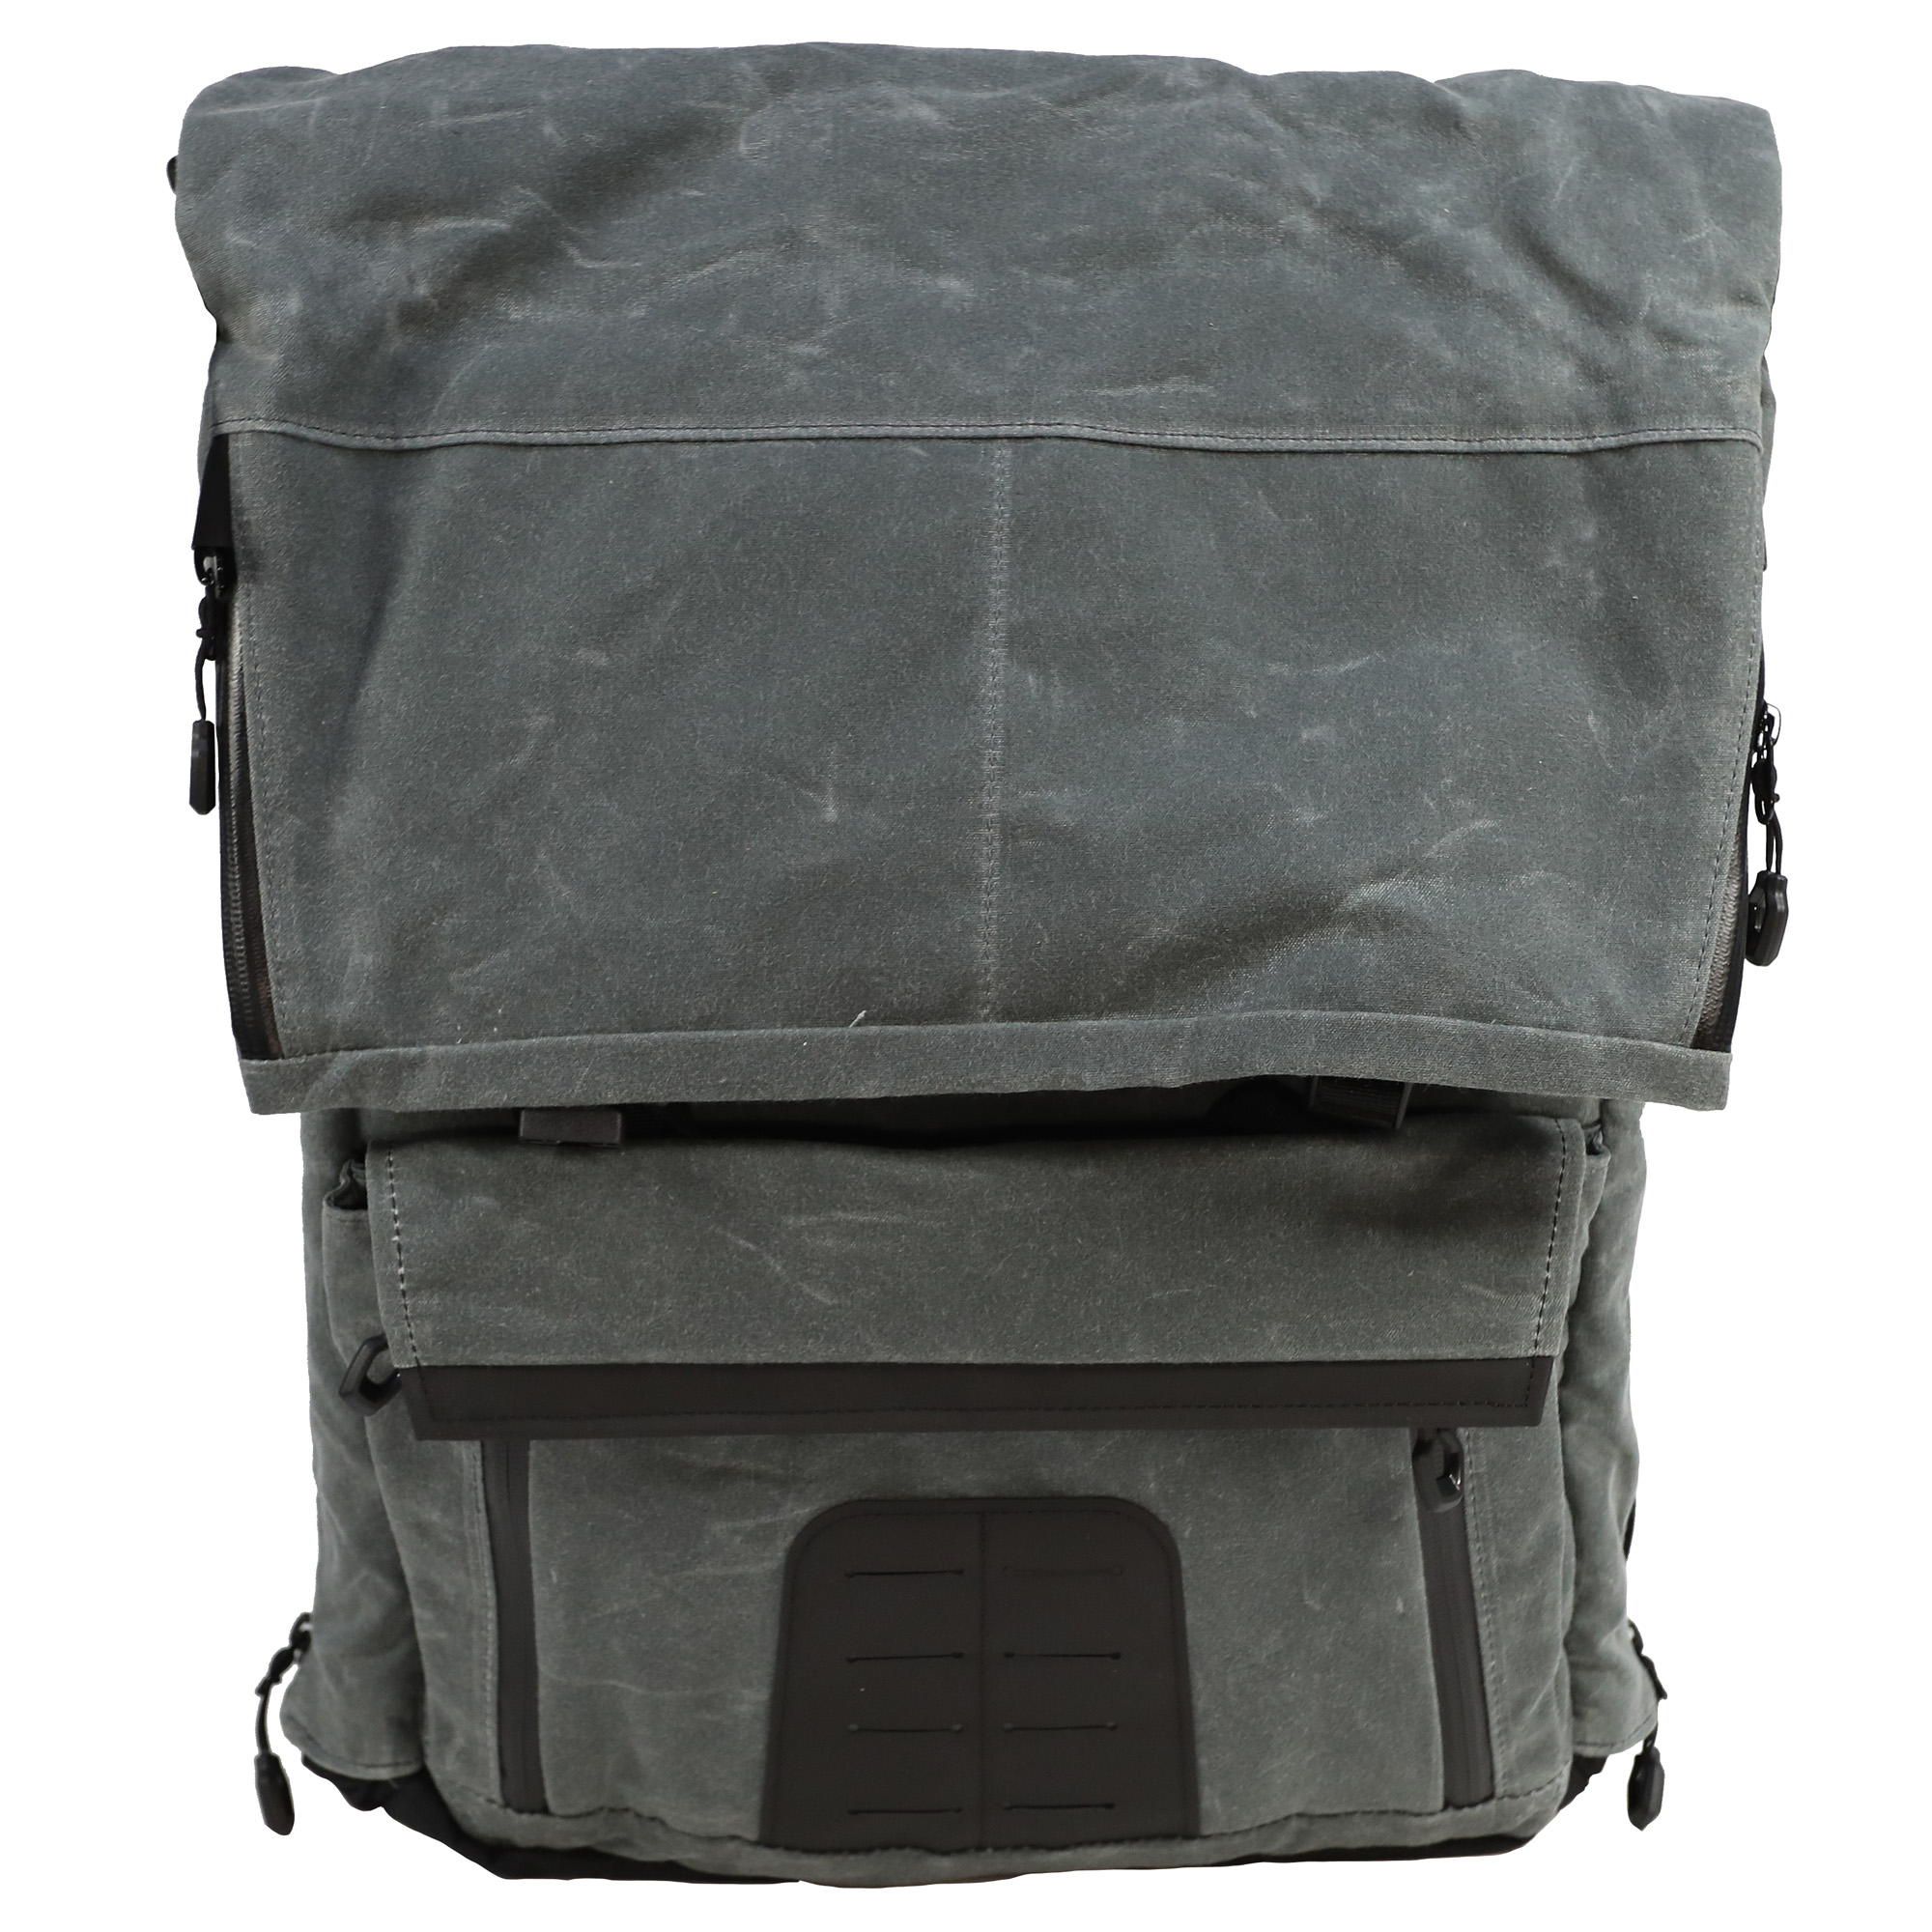 GREY GHOST GEAR GYPSY PACK 2.0 WAXED CANVAS CHARCOAL